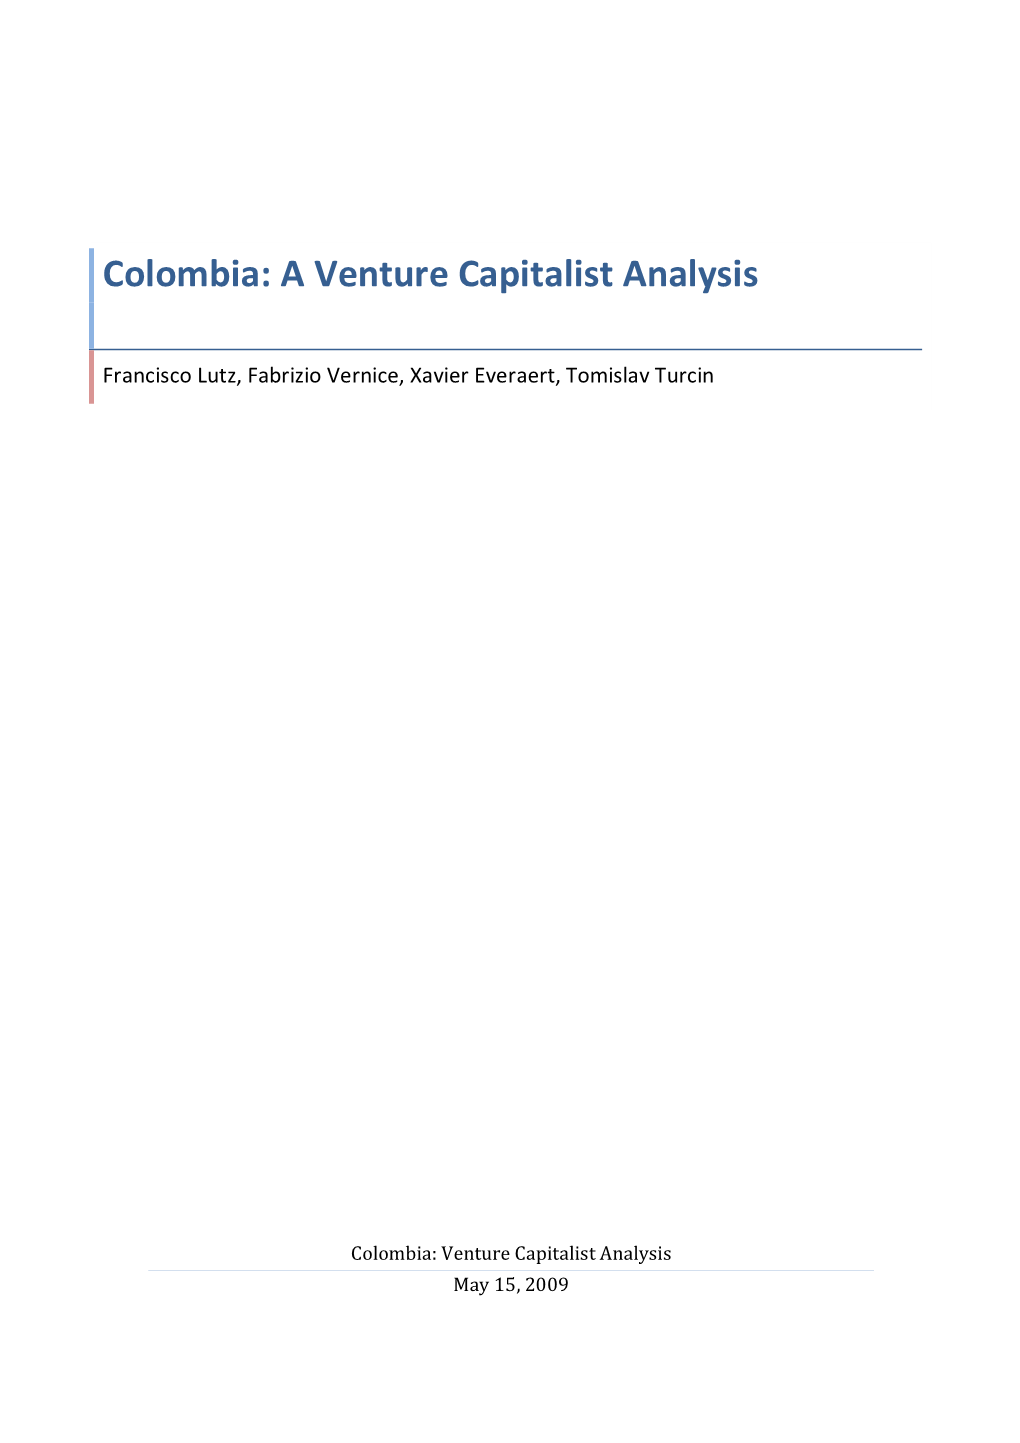 Colombia: a Venture Capitalist Analysis